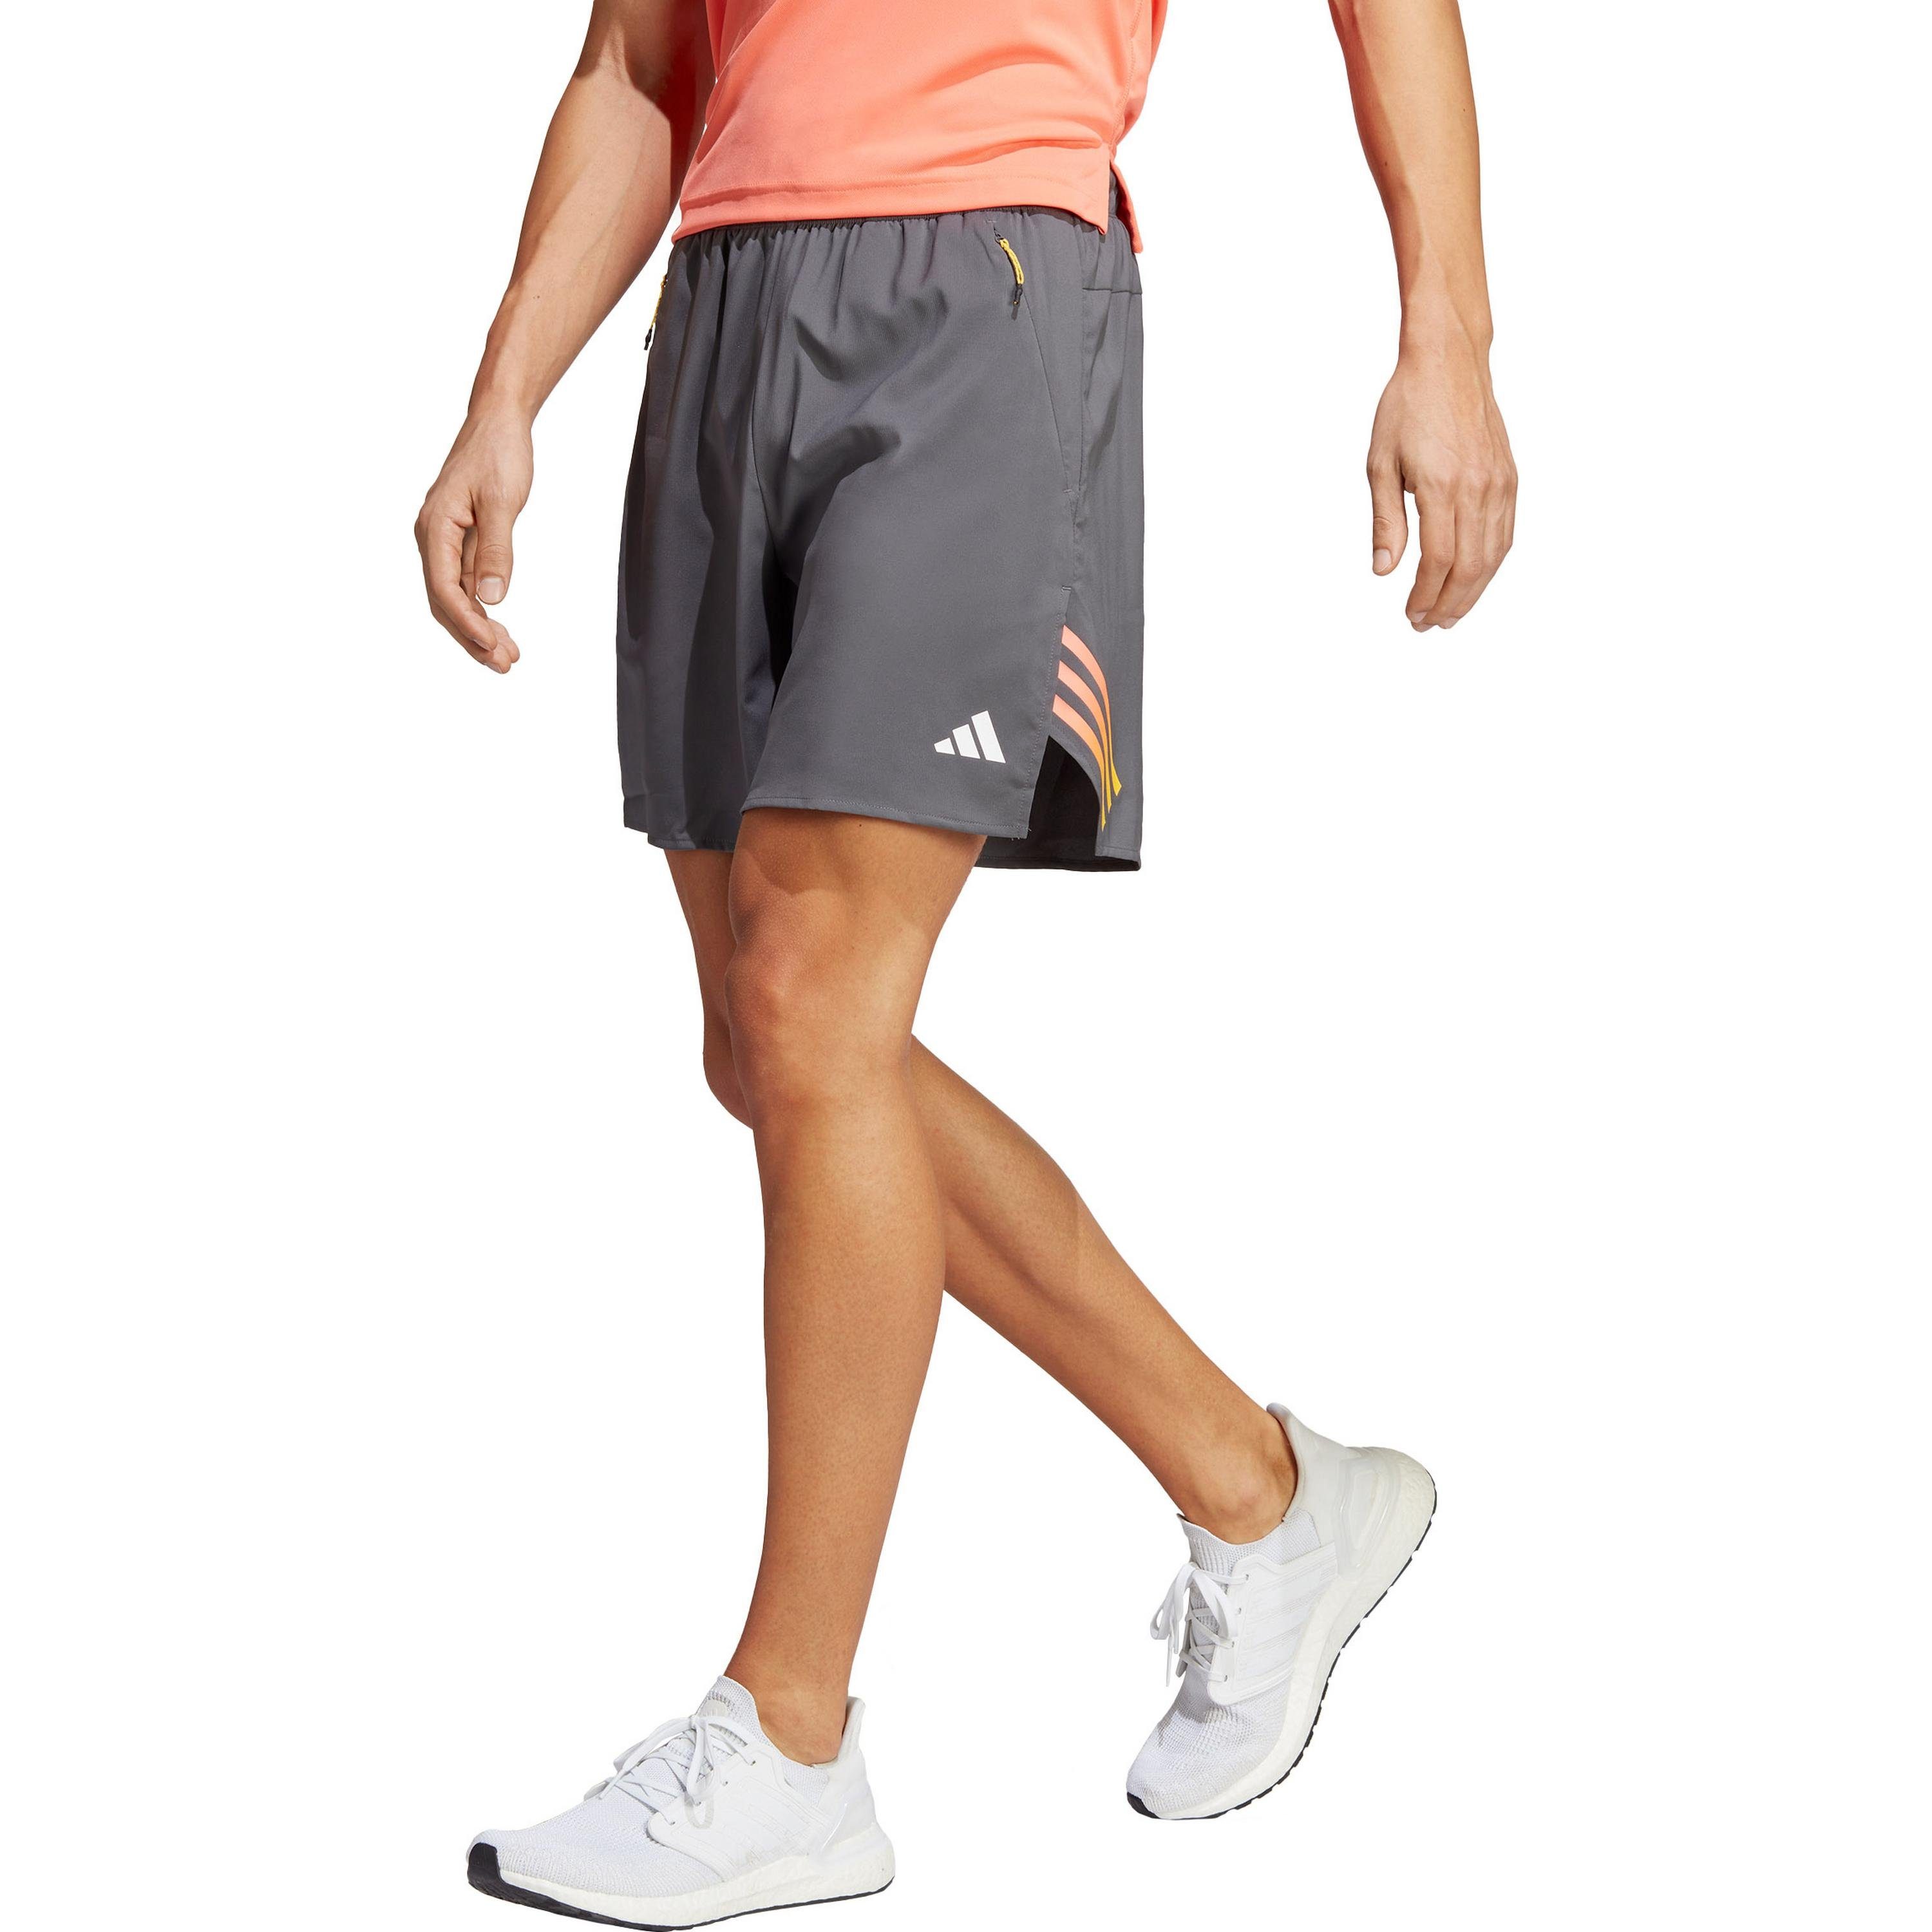 adidas Funktionsshorts five Performance grey